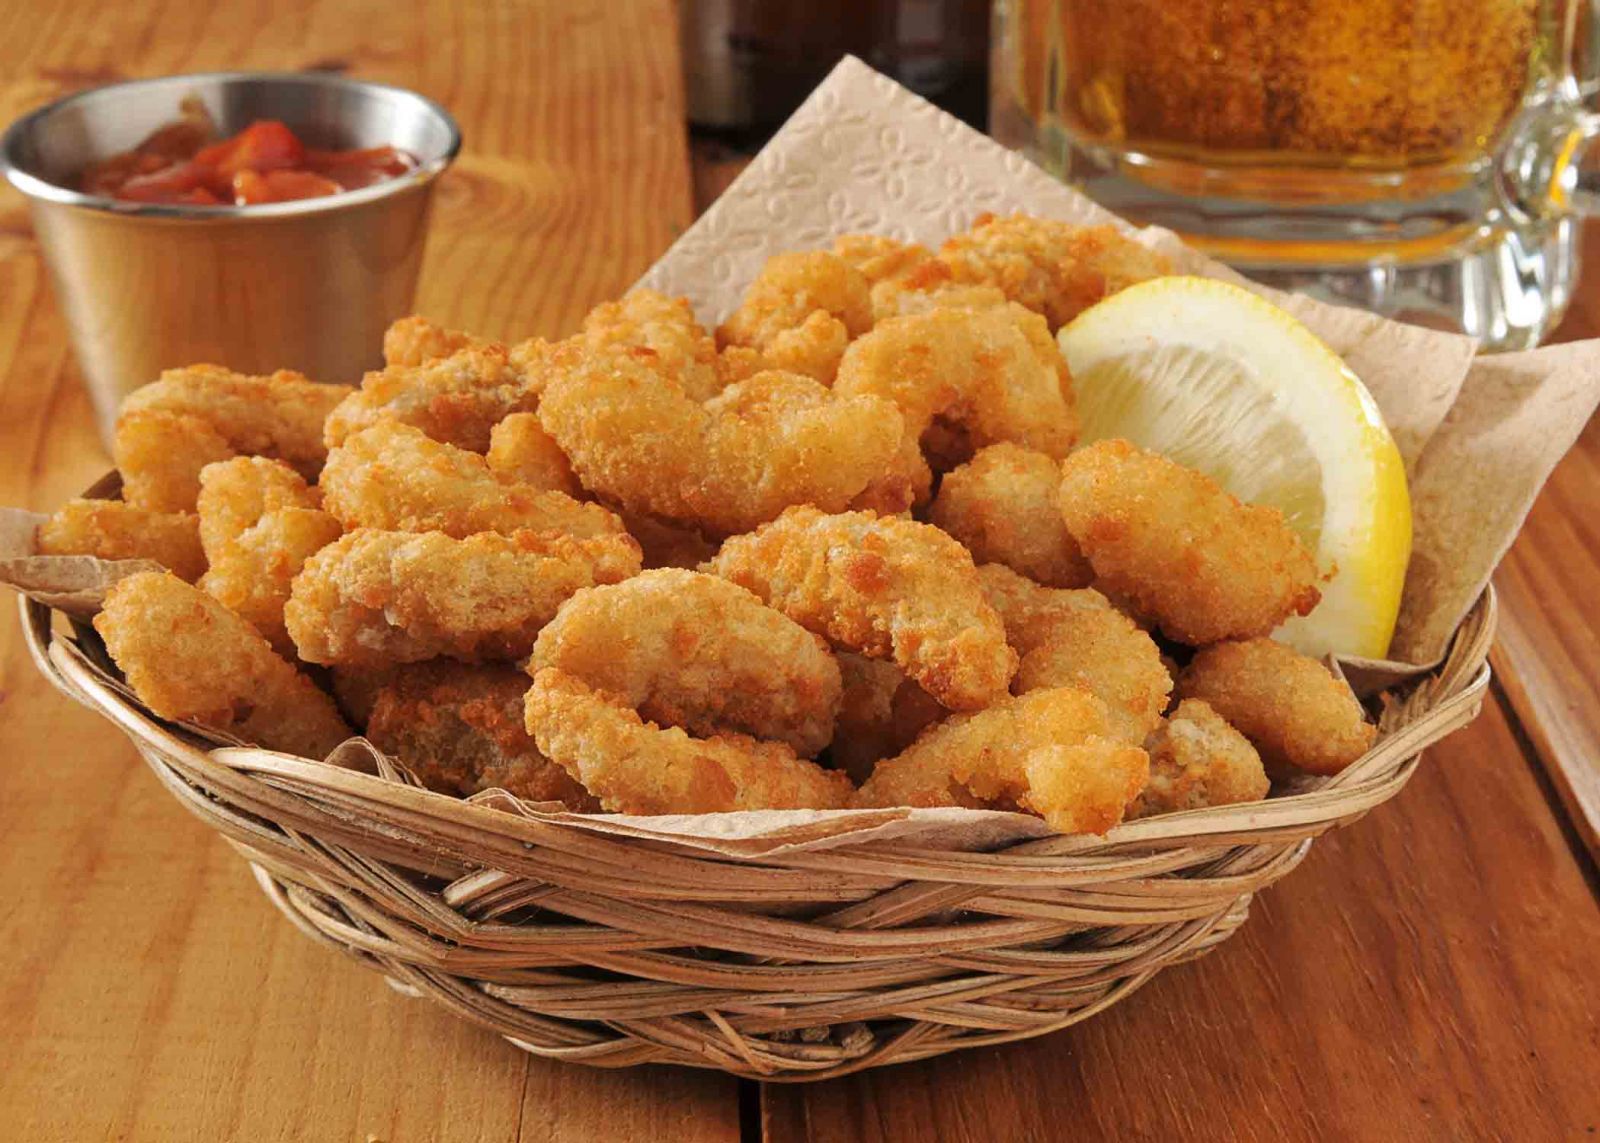 Fried shrimp basket with french fries